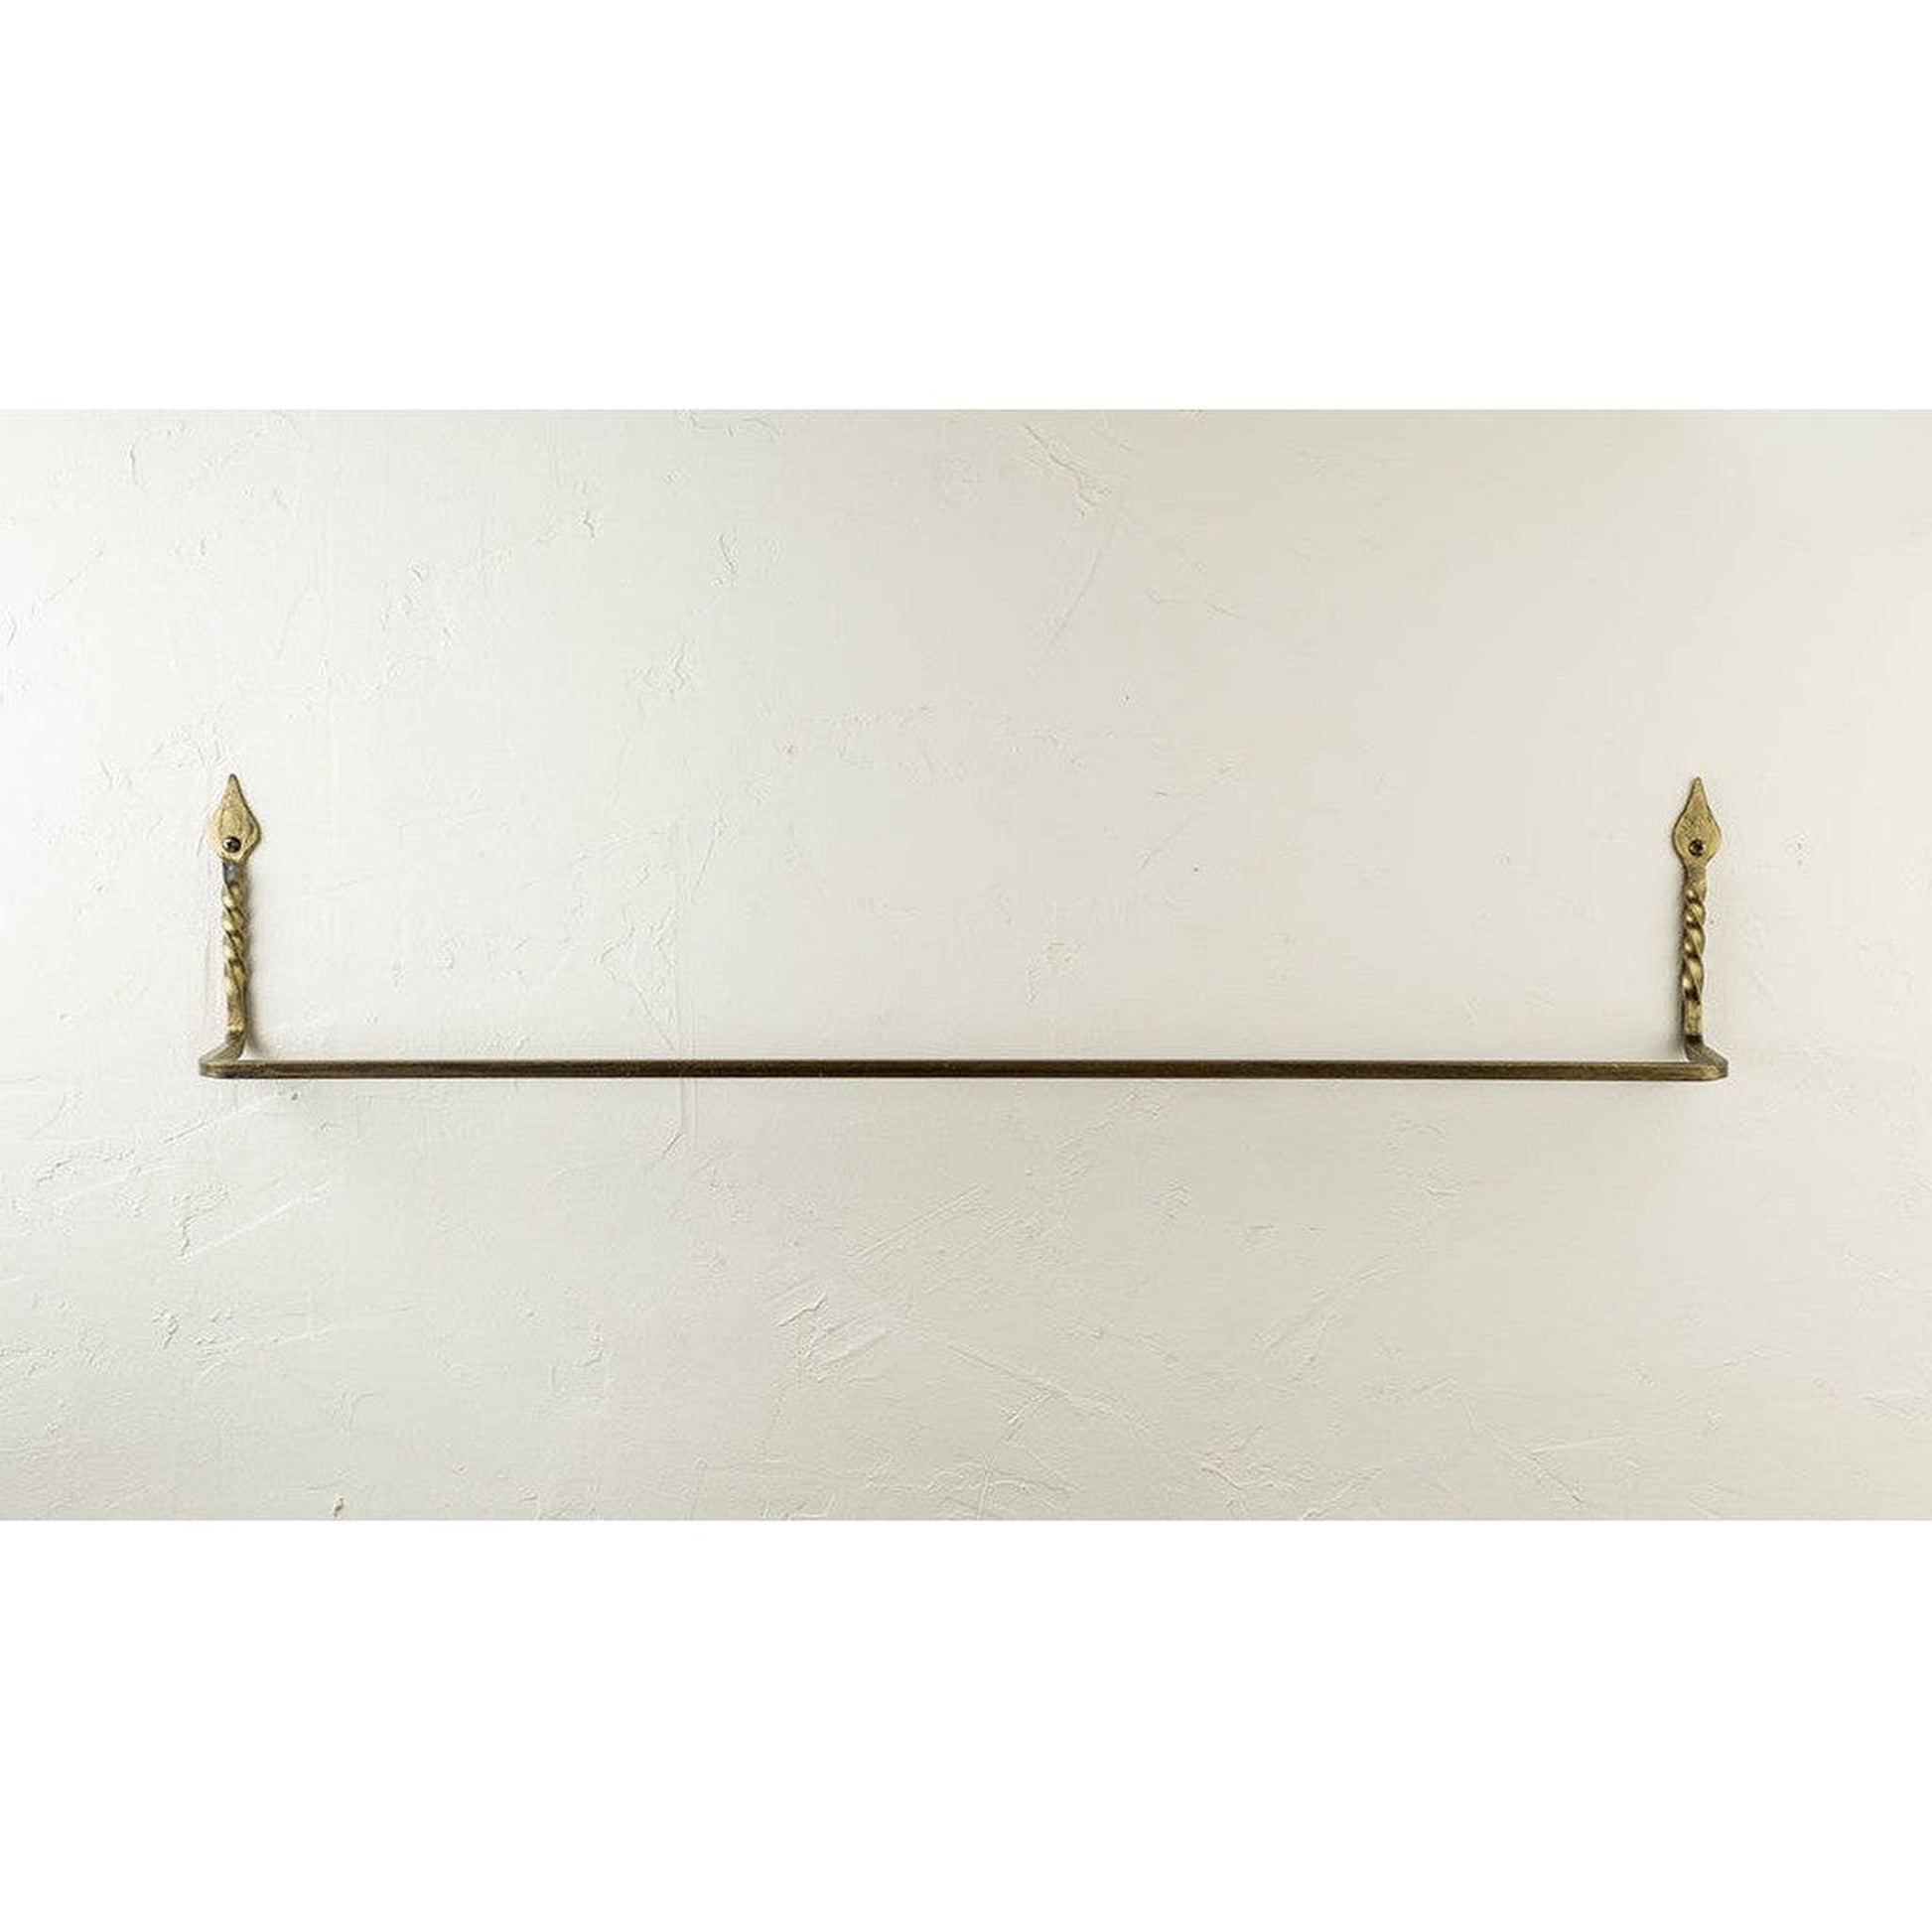 Stone County Ironworks Tulip Twist 24" Natural Black Iron Towel Bar With Copper Iron Accent